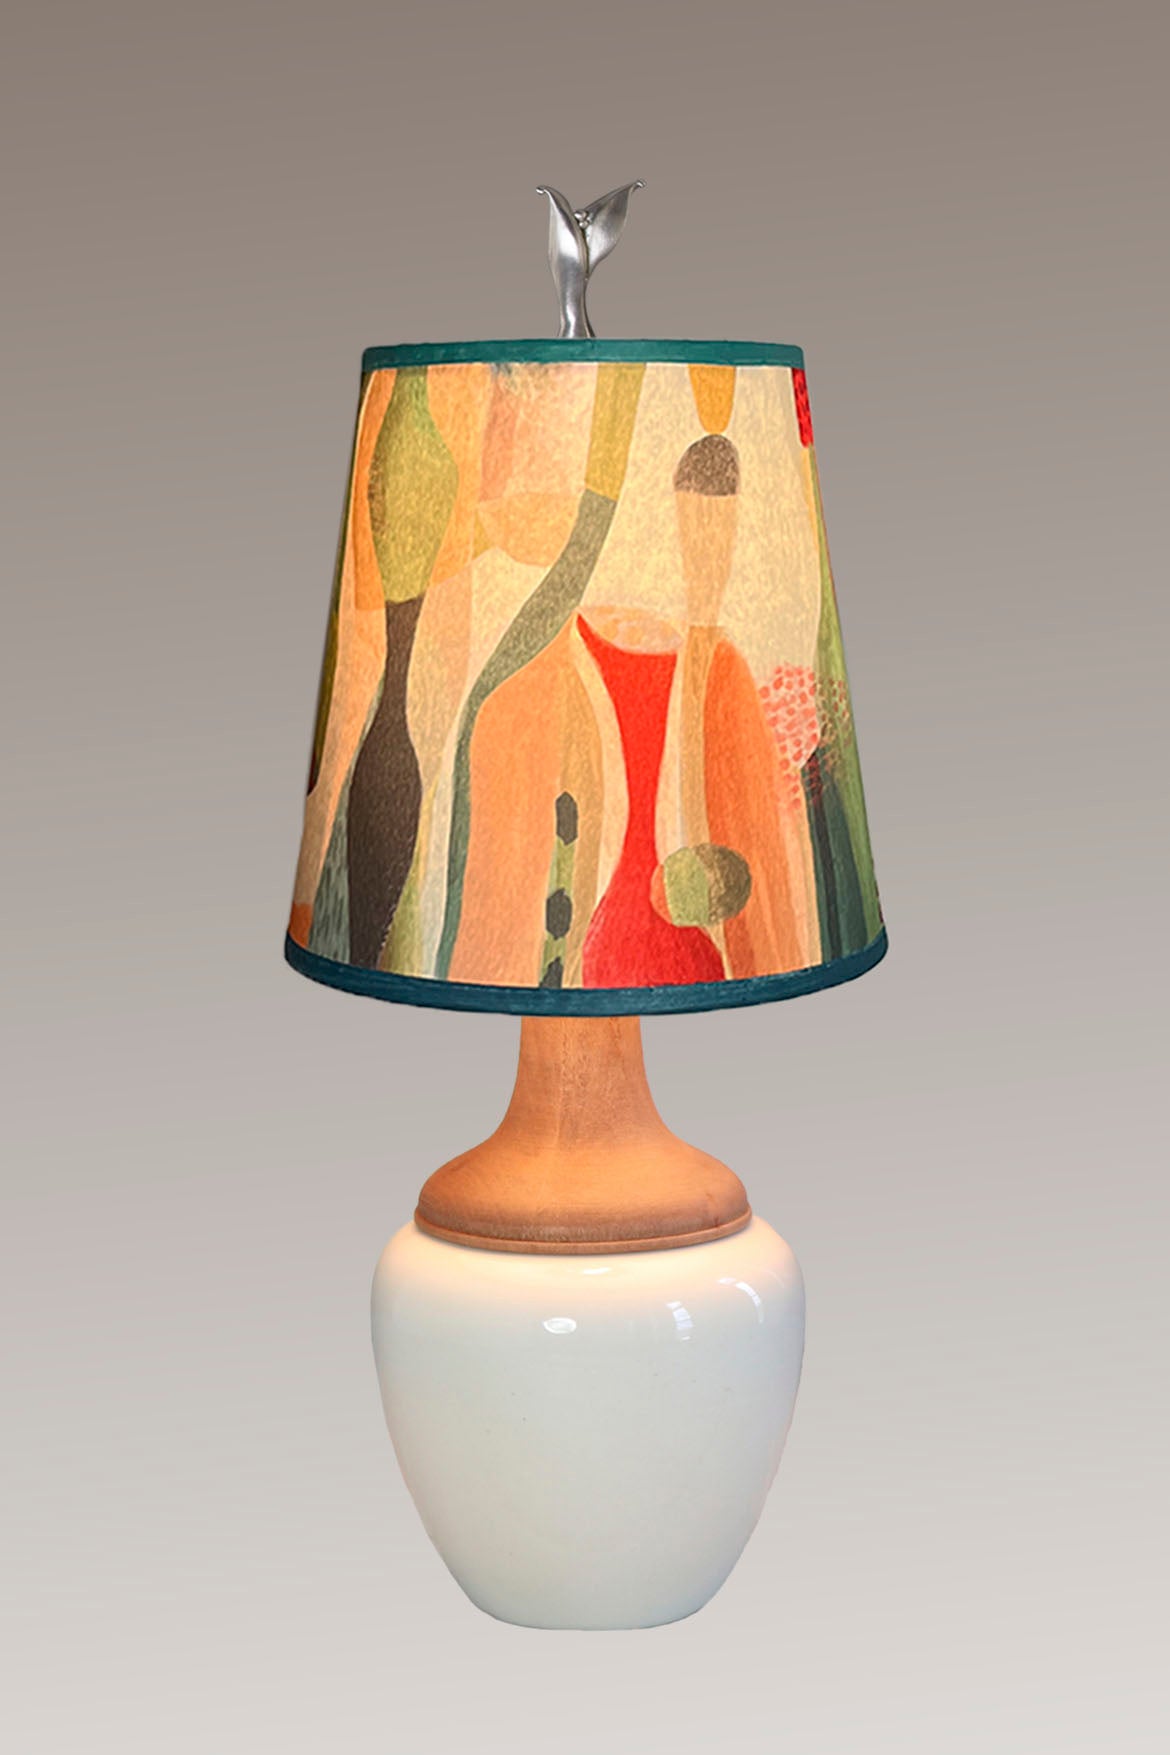 Ceramic and Maple Table Lamp with Small Drum Shade in Riviera in Poppy